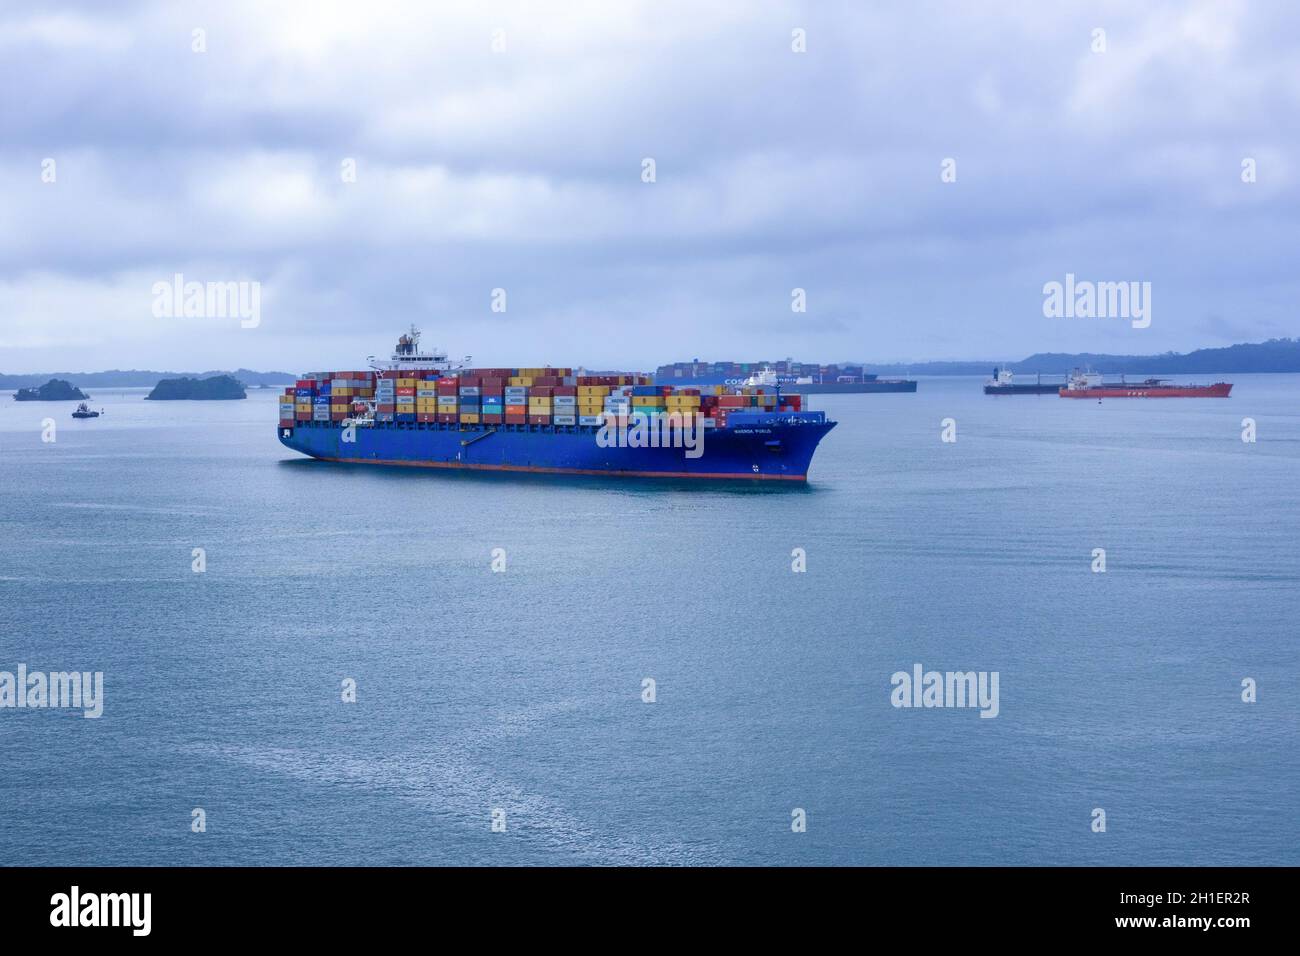 Panama Canal, Panama - December 7, 2019: Maersk Line container cargo ship at Gatun lake near Panama Canal. It is the world's largest container shippin Stock Photo